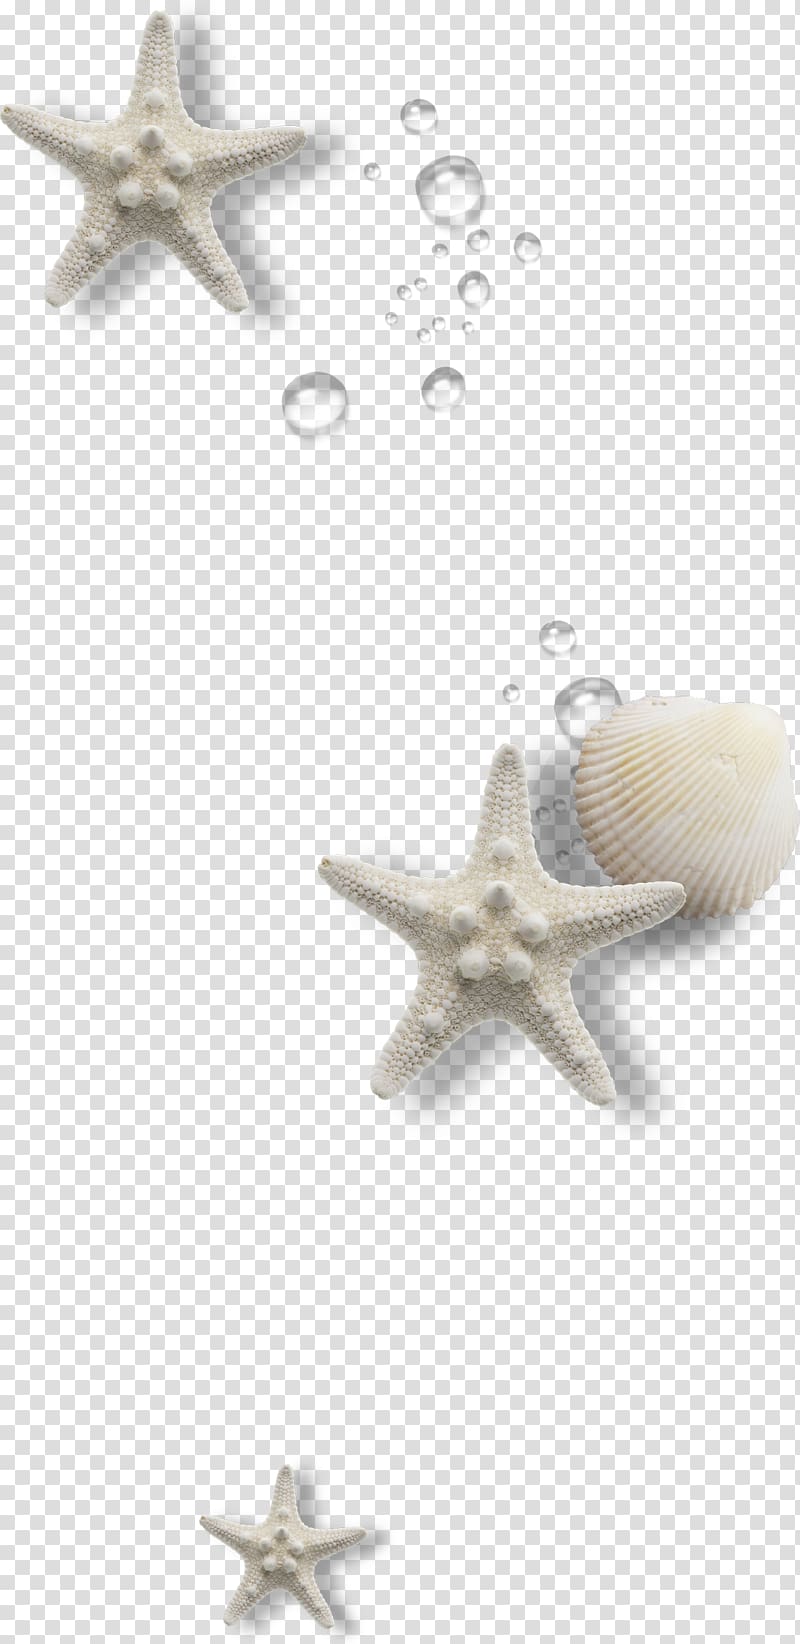 shell transparent background PNG clipart